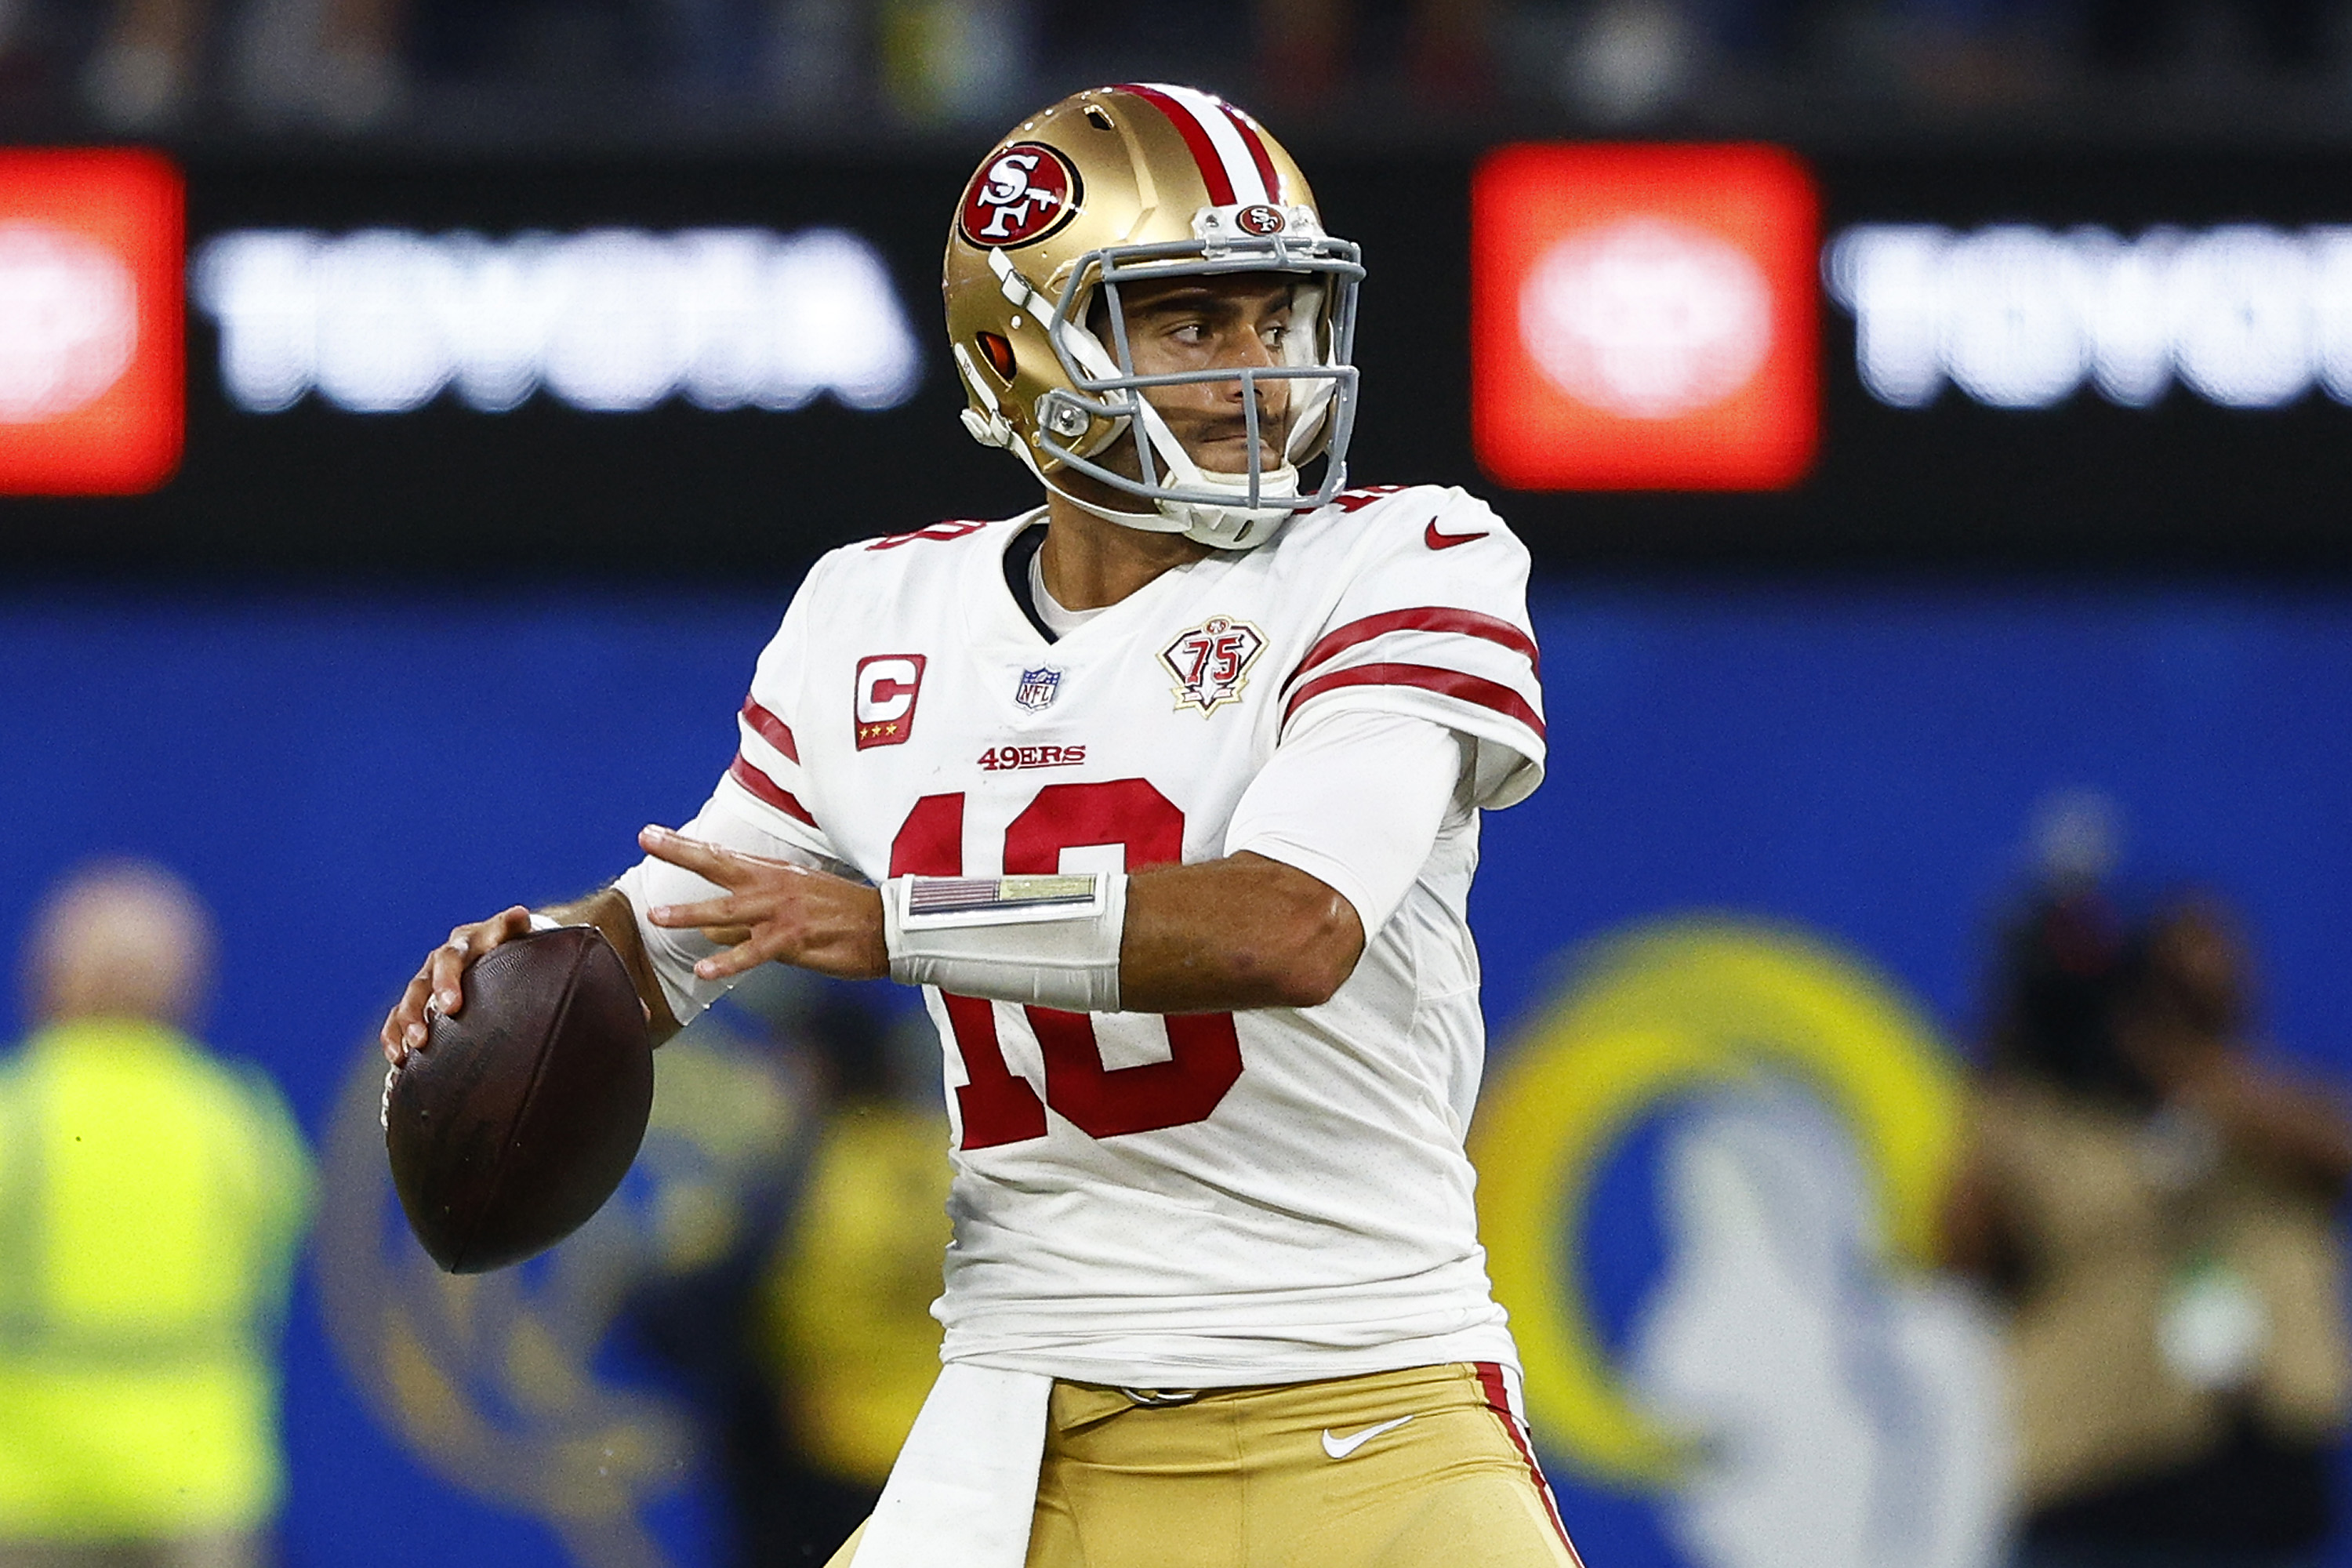 49ers Rumors: Jimmy Garoppolo Could Be Cut After Shoulder Surgery Despite Trade ..